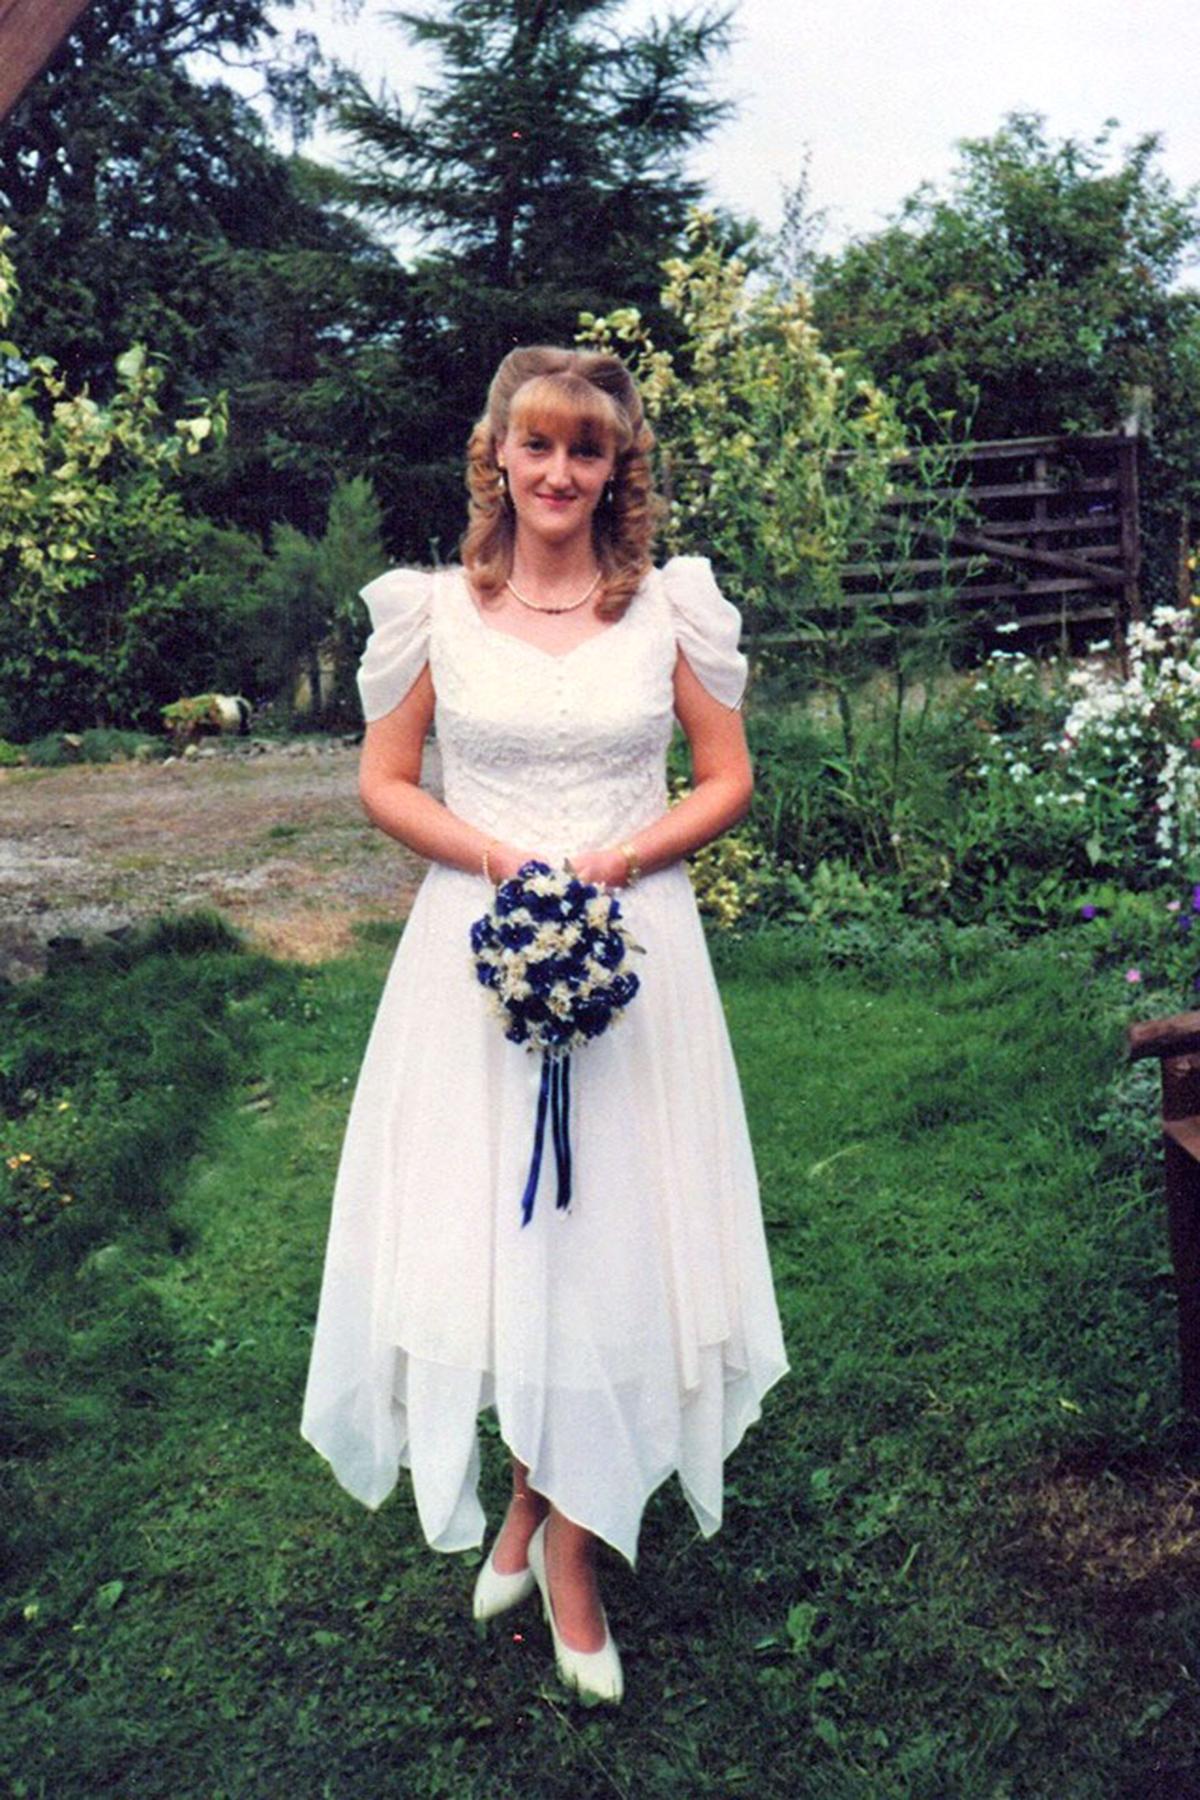 Dawn, from Melton Mowbray, at her wedding day in 1998. (Caters News)